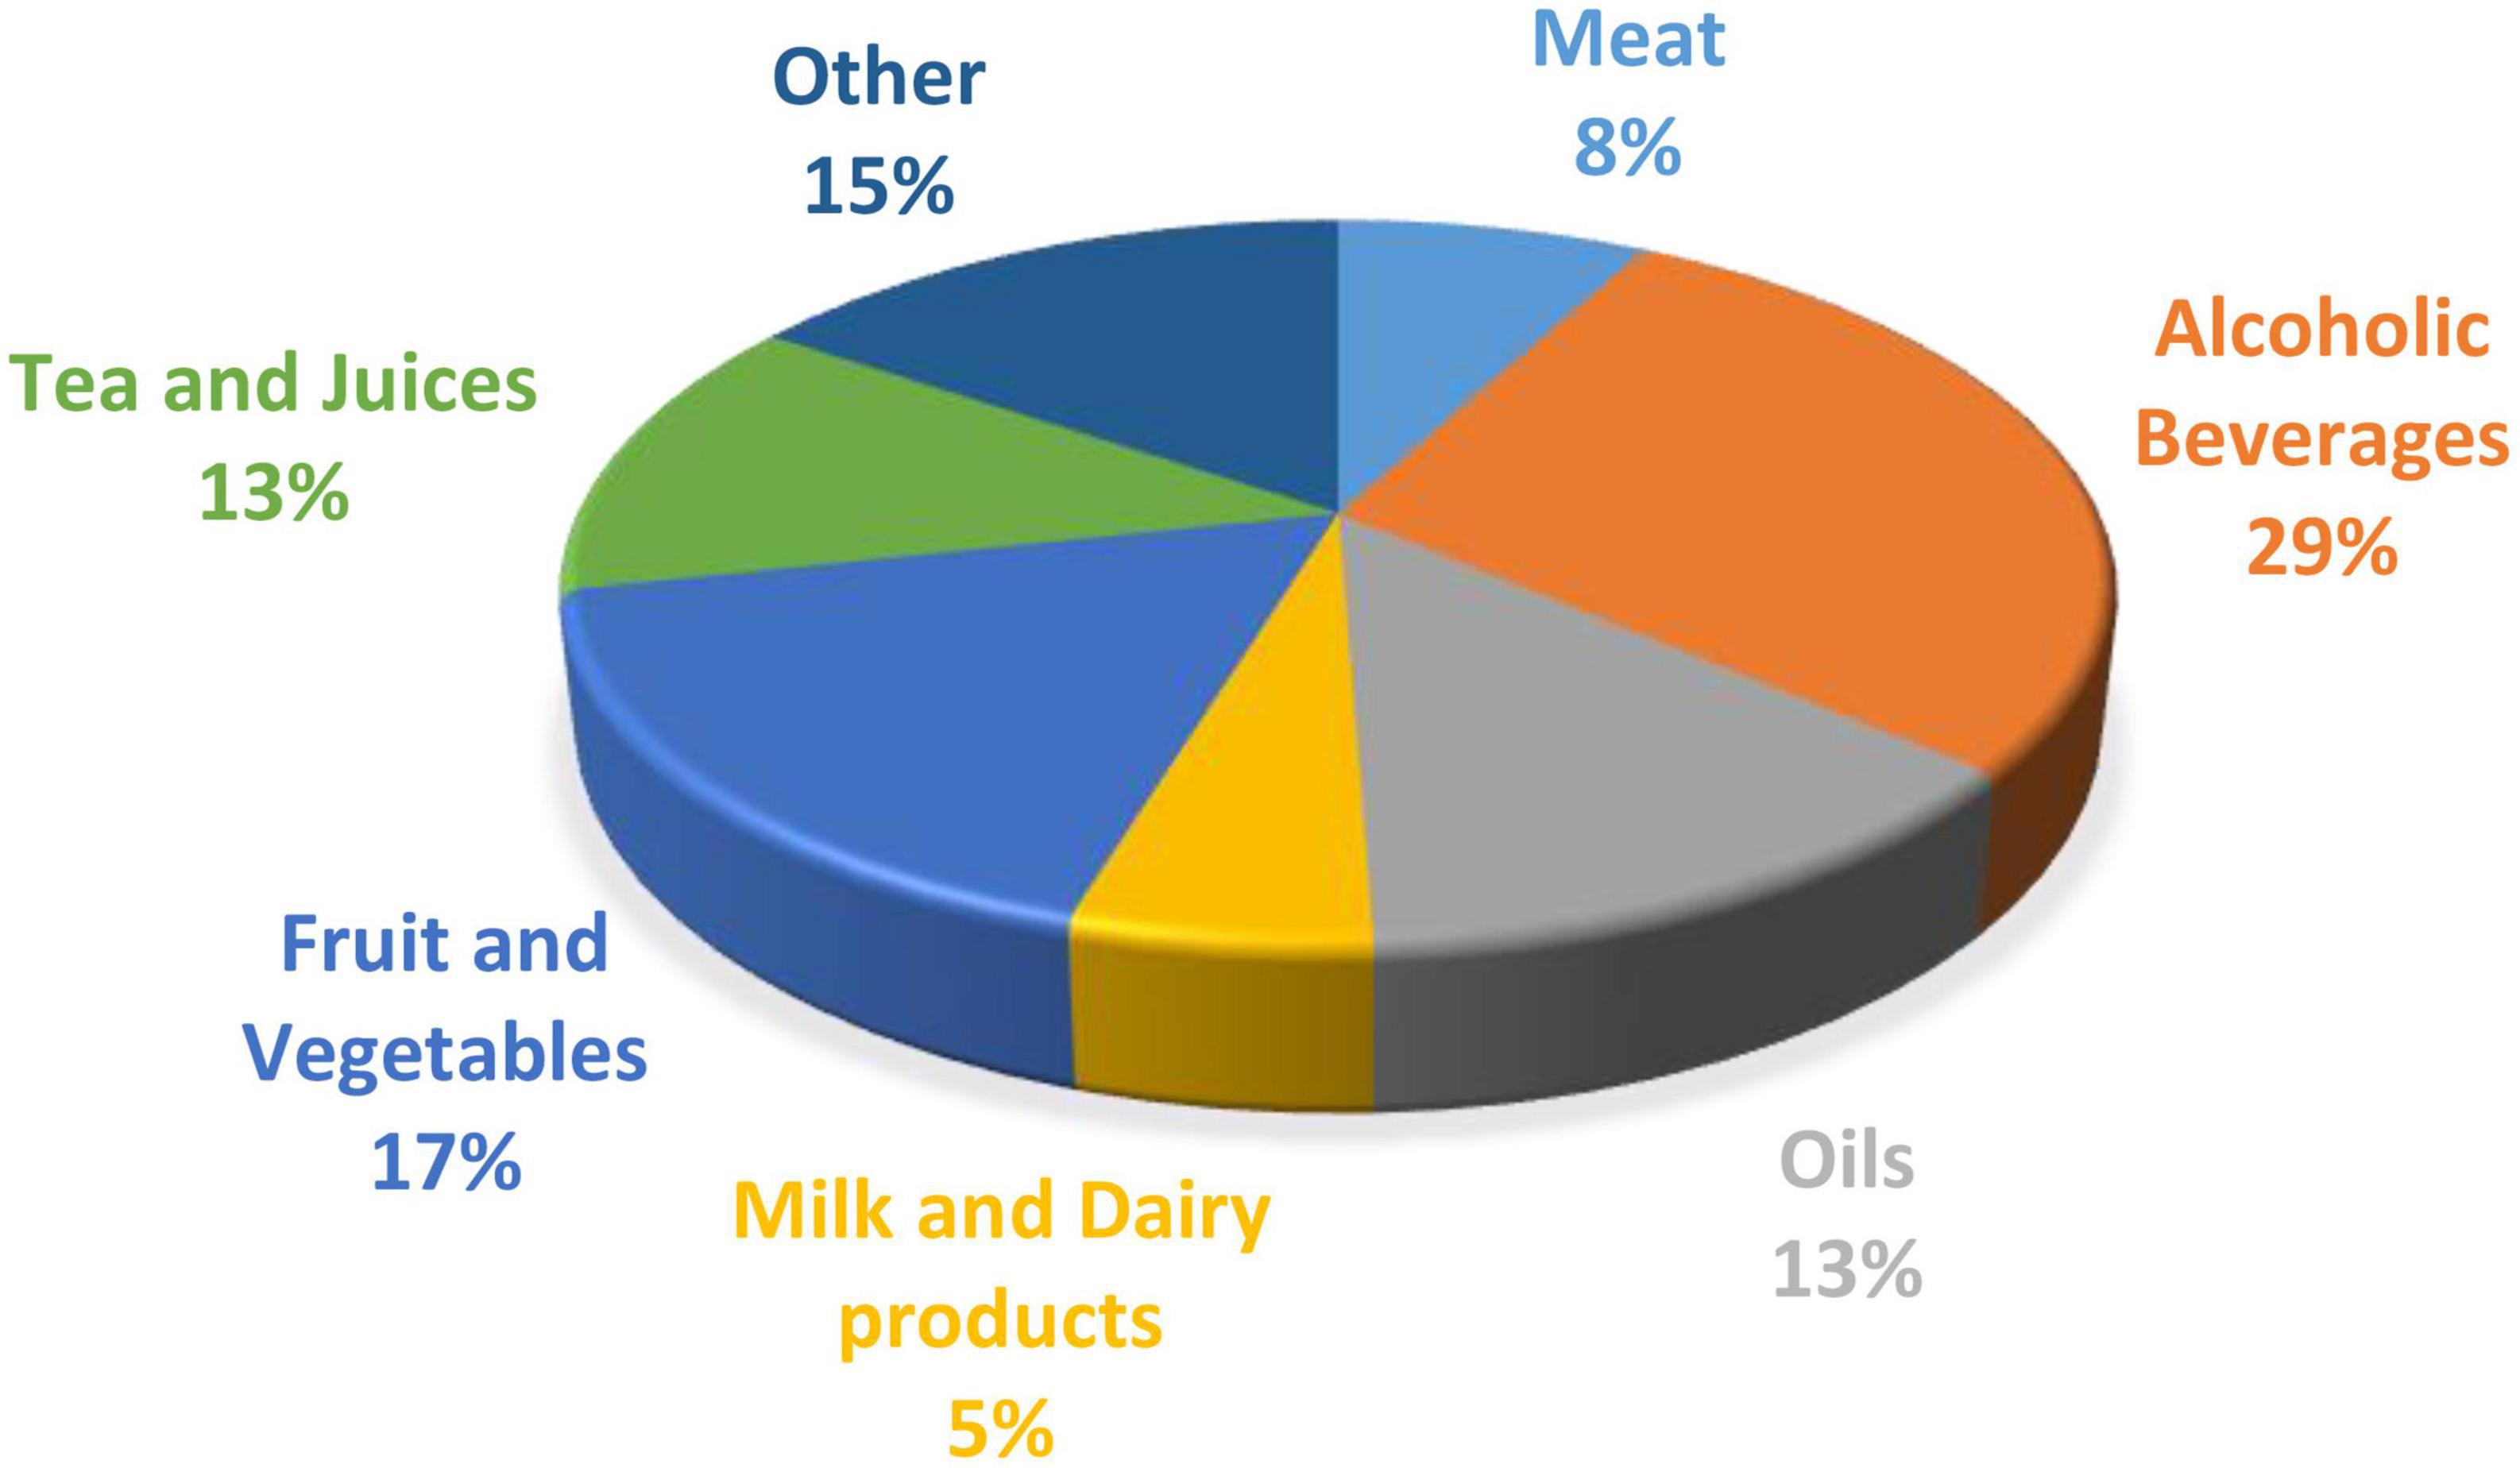 Spectroscopic technologies and data fusion: Applications for the dairy industry